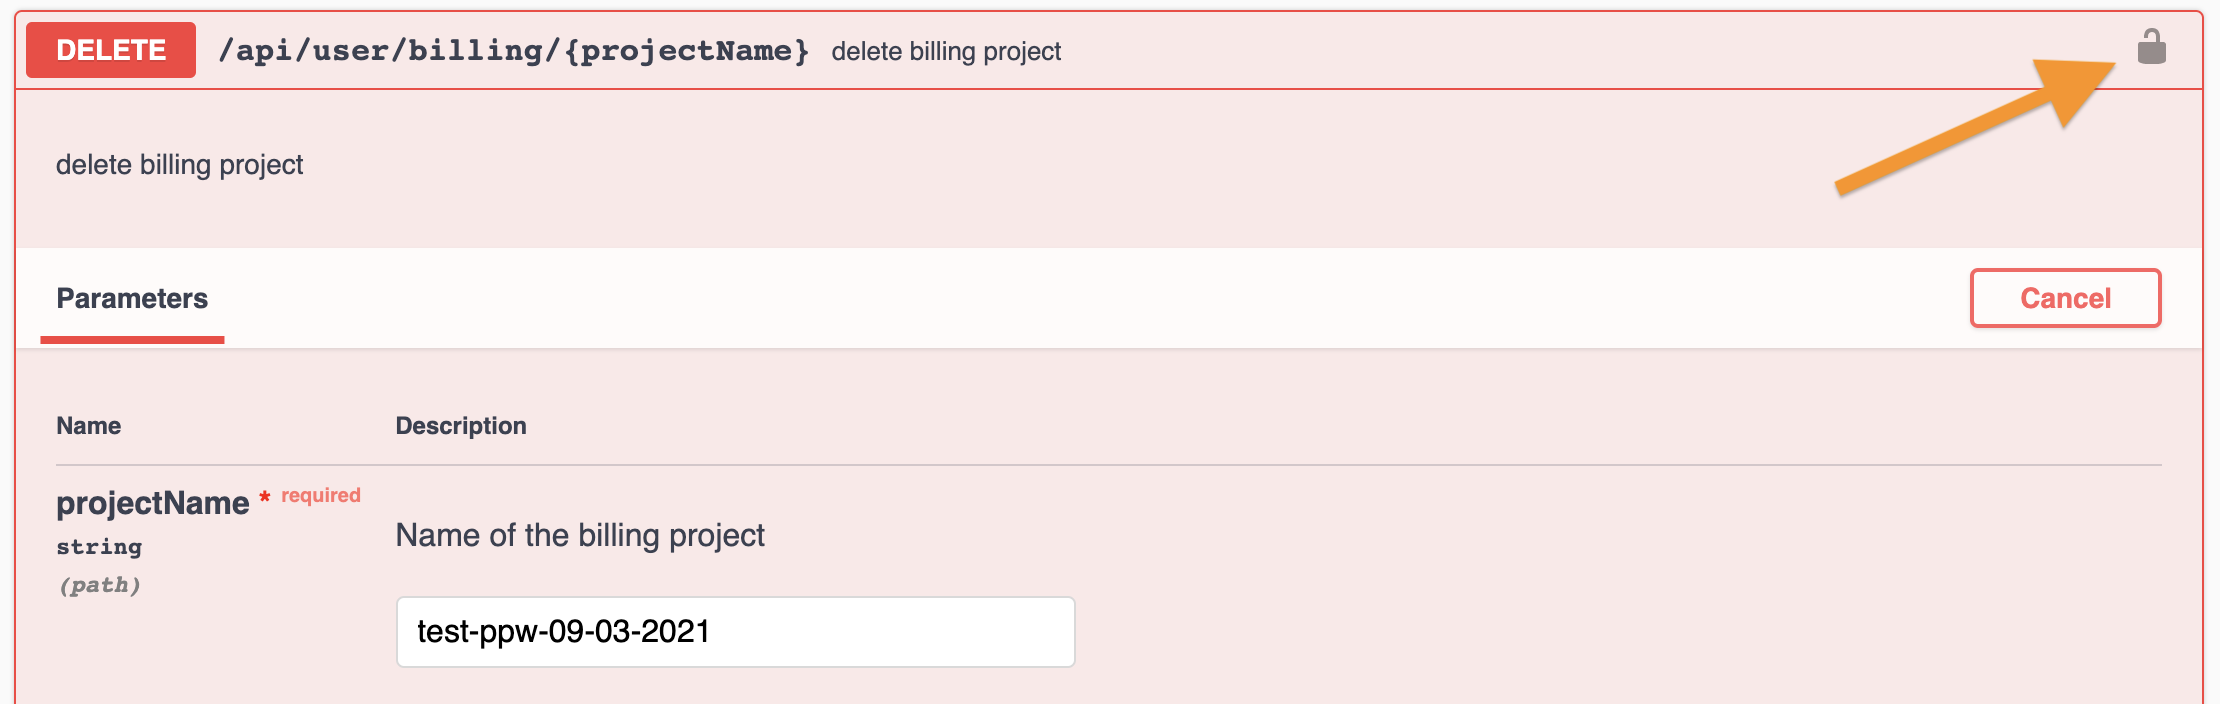 Delete-billing-project-with-Swagger_Unlock-Authenticate_Screen_shot.png